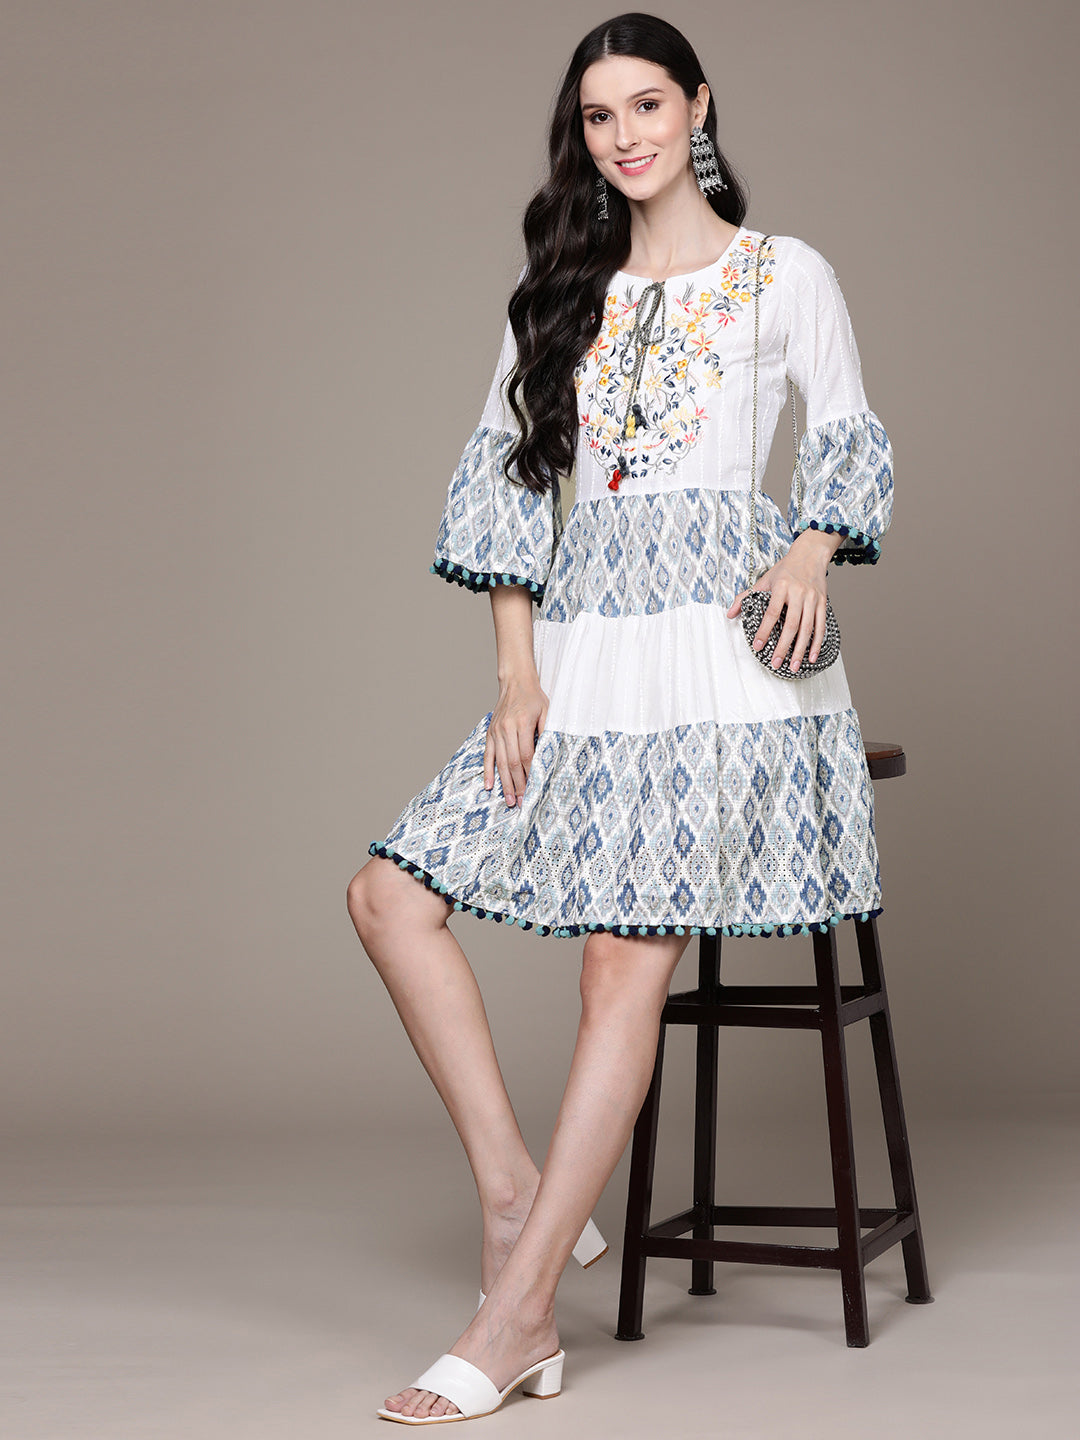 Ishin Women's White & Blue Embroidered A-Line Dress